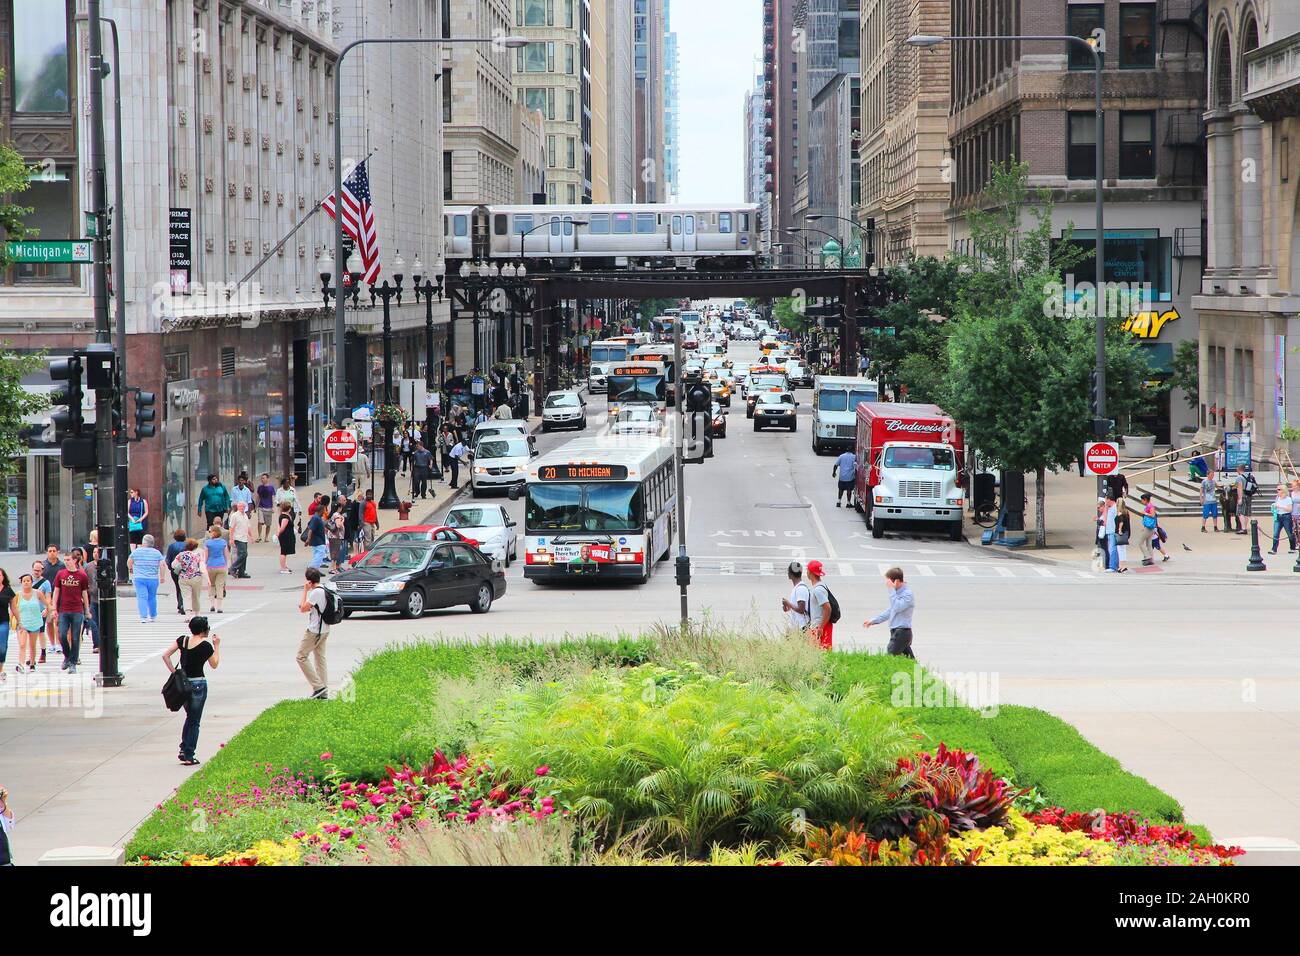 CHICAGO, USA - JUNE 26, 2013: People drive downtown in Chicago. Chicago is the 3rd most populous US city with 2.7 million residents (8.7 million in it Stock Photo